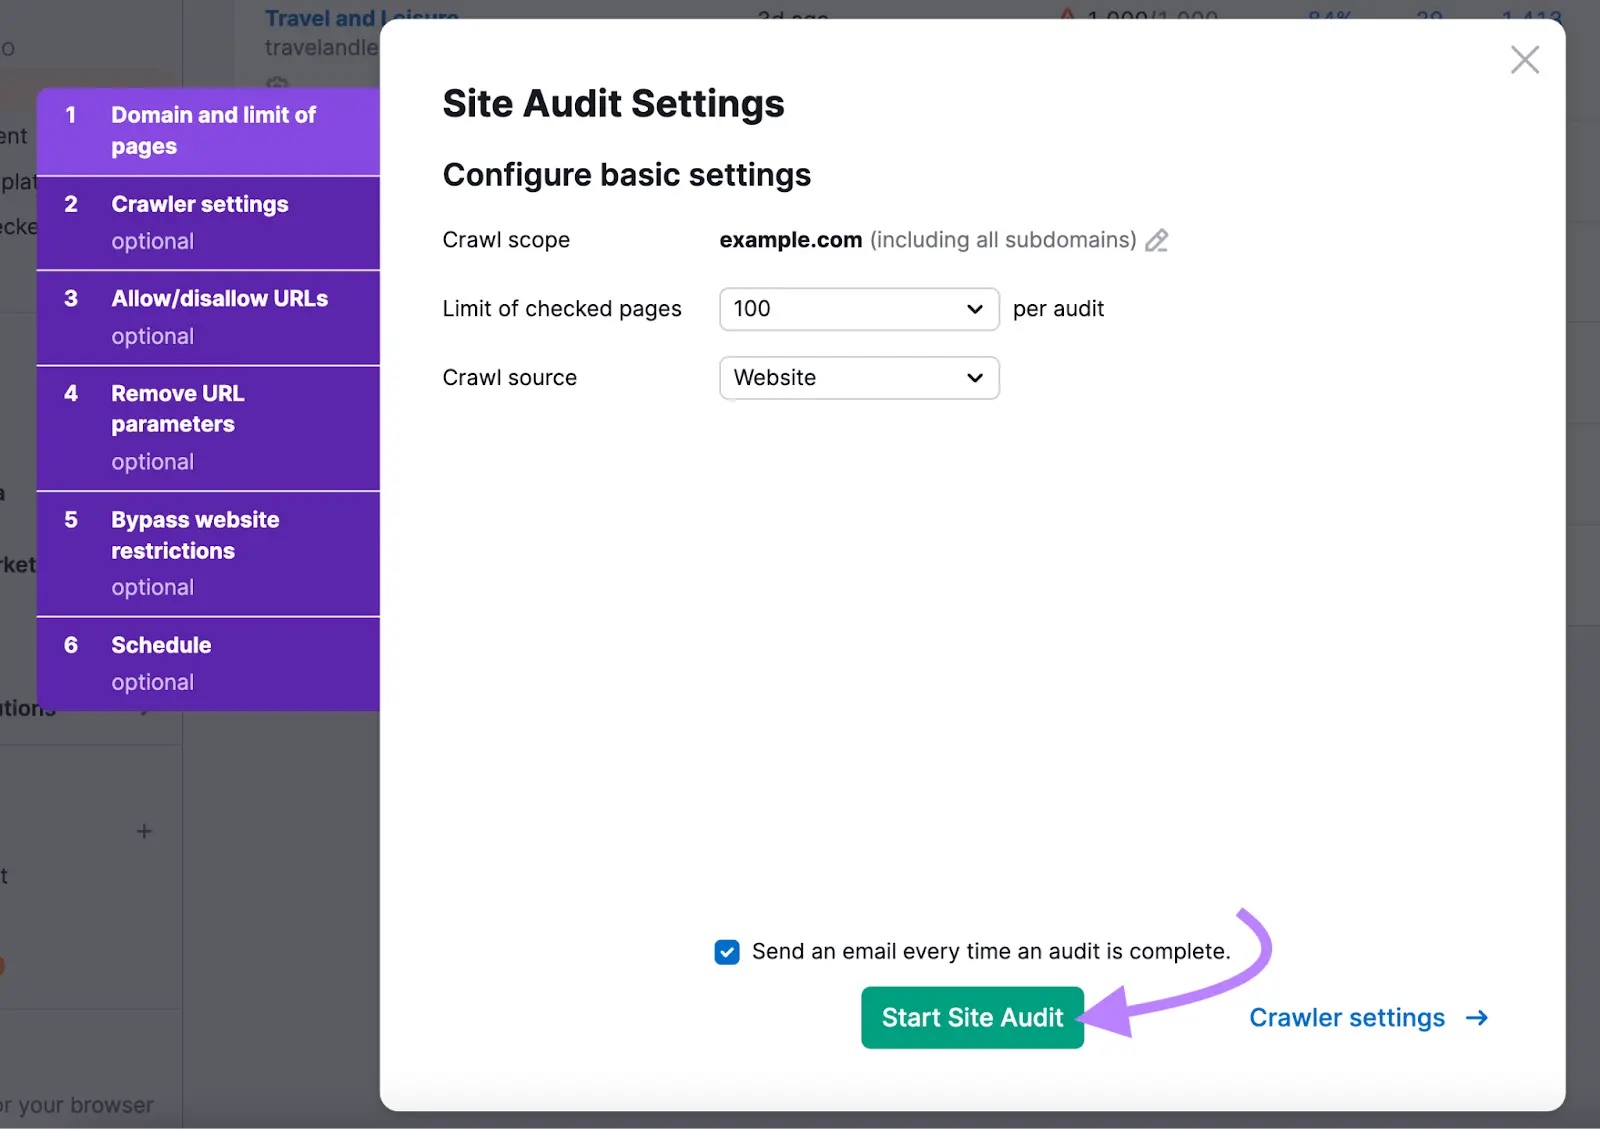 Site audit settings page to select crawl scope, source and number of pages to check.